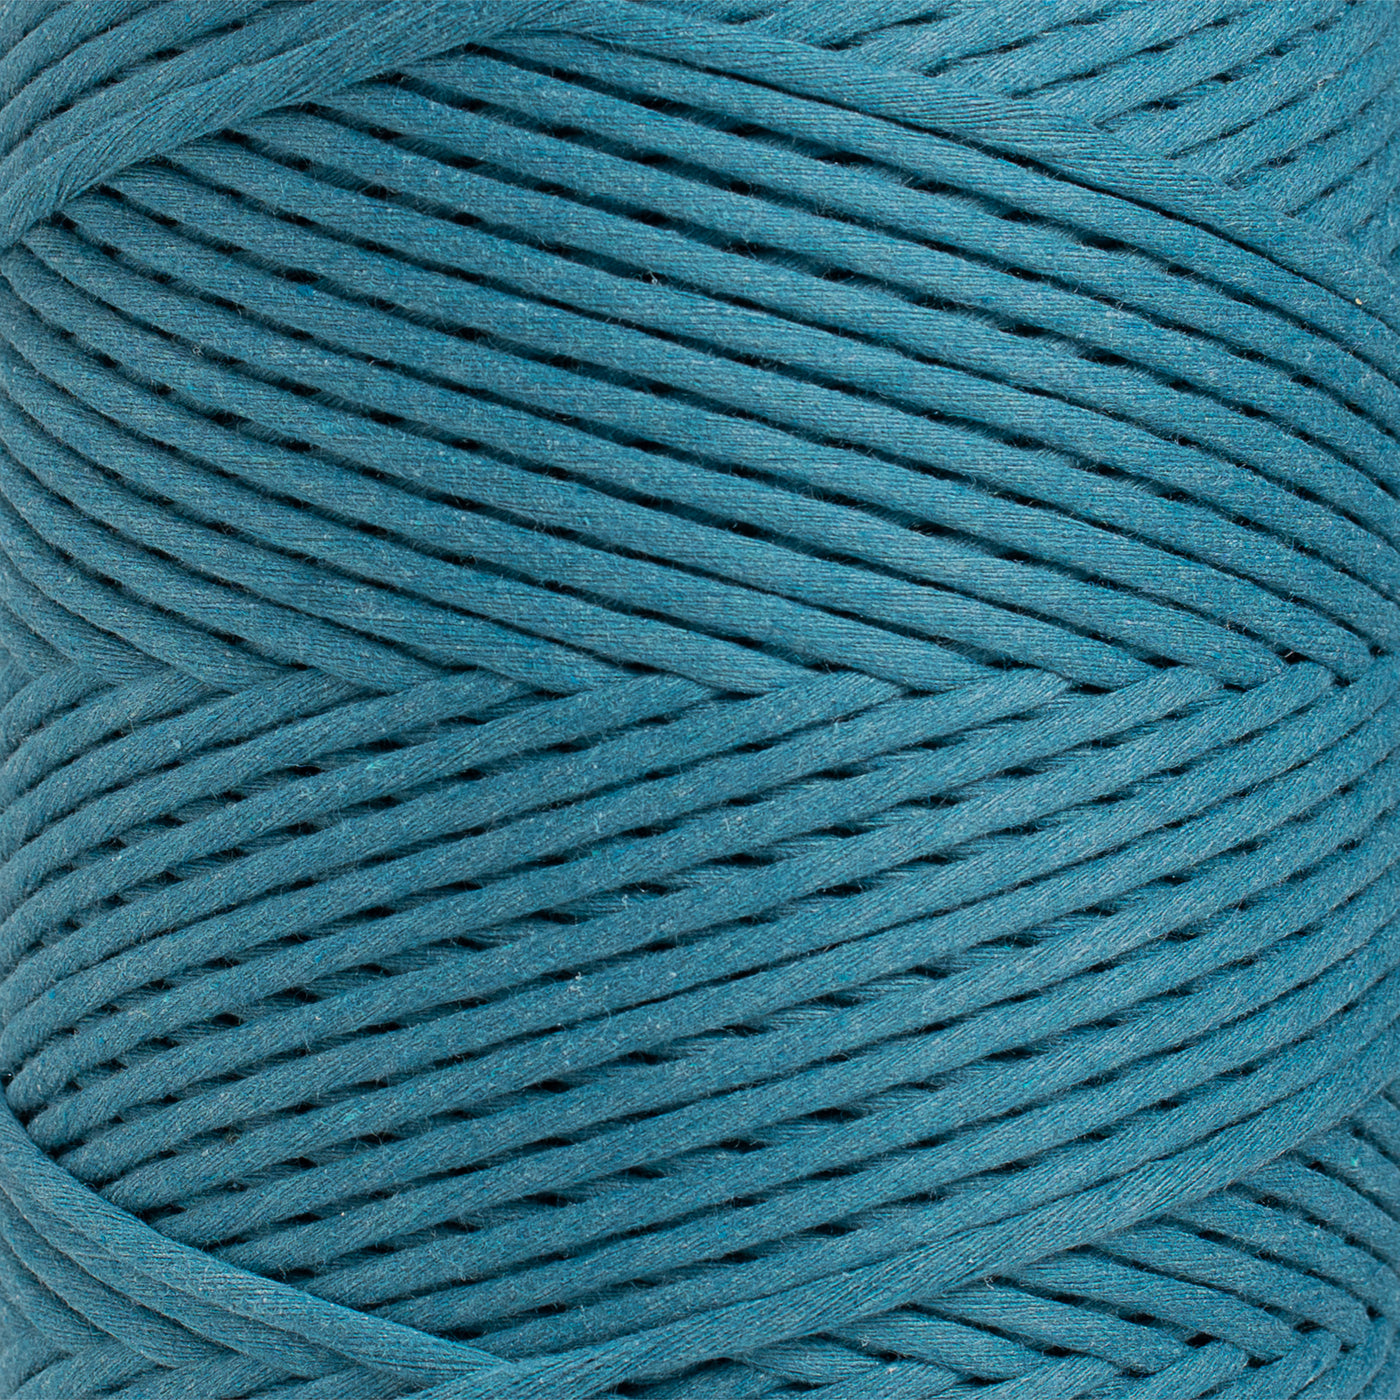 SOFT COTTON CORD ZERO WASTE 4 MM - 1 SINGLE STRAND - OCEAN TEAL COLOR